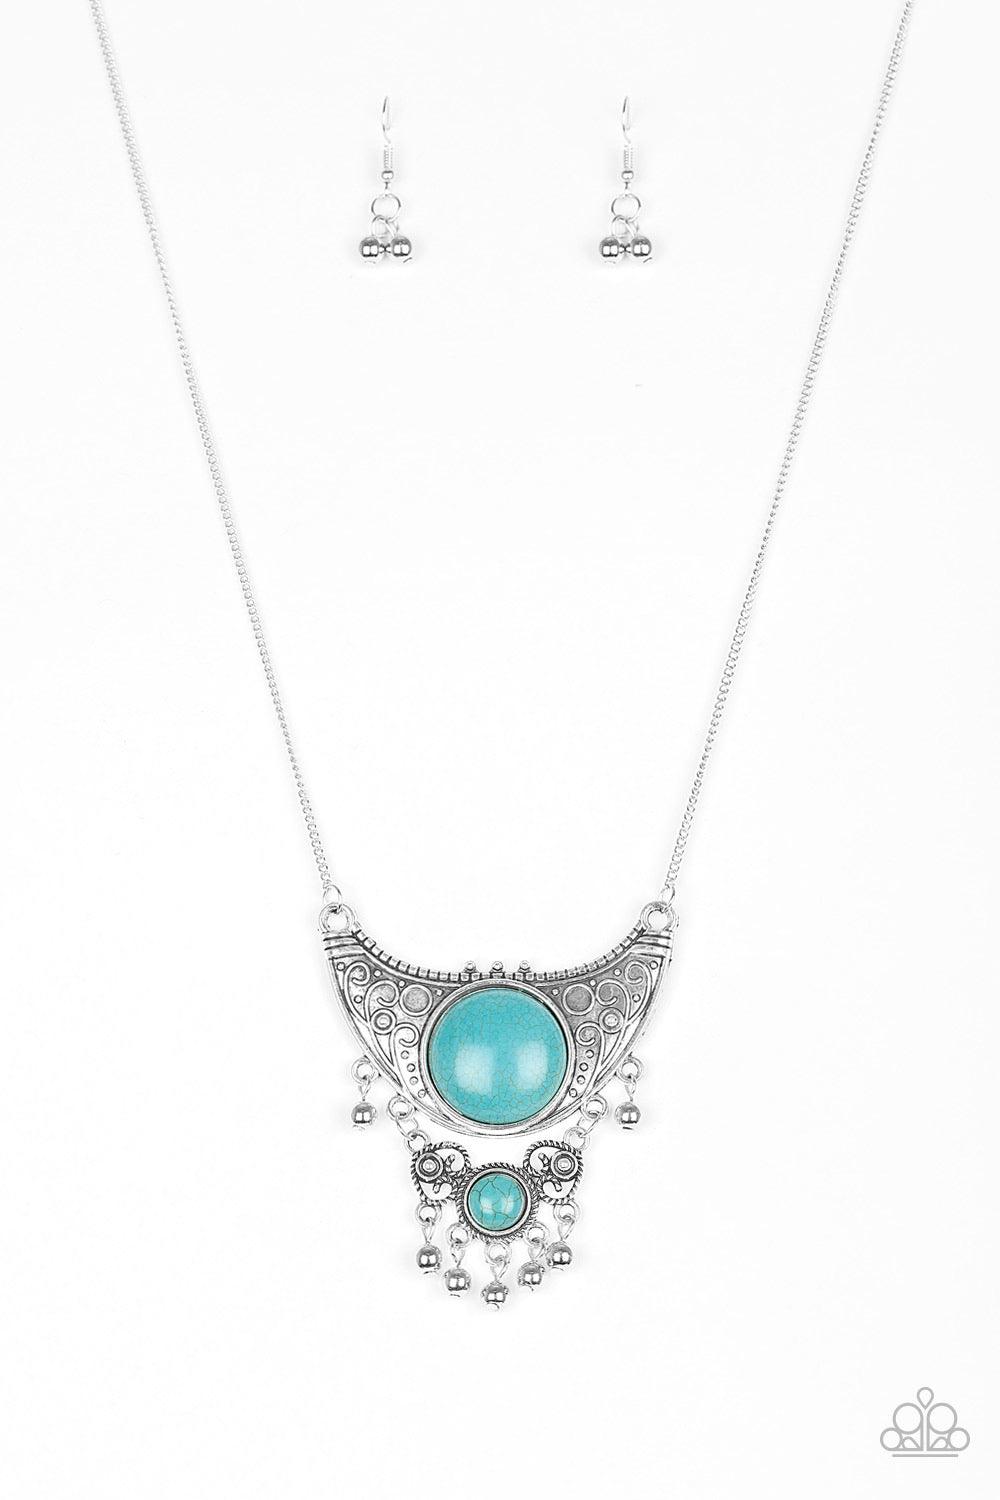 Paparazzi Accessories Summit Style - Blue Embossed in dotted and swirling details, a large silver crescent attaches to a smaller frilly frame, creating a stacked pendant. Swinging from the bottom of a lengthened silver chain, the tribal inspired pendant f